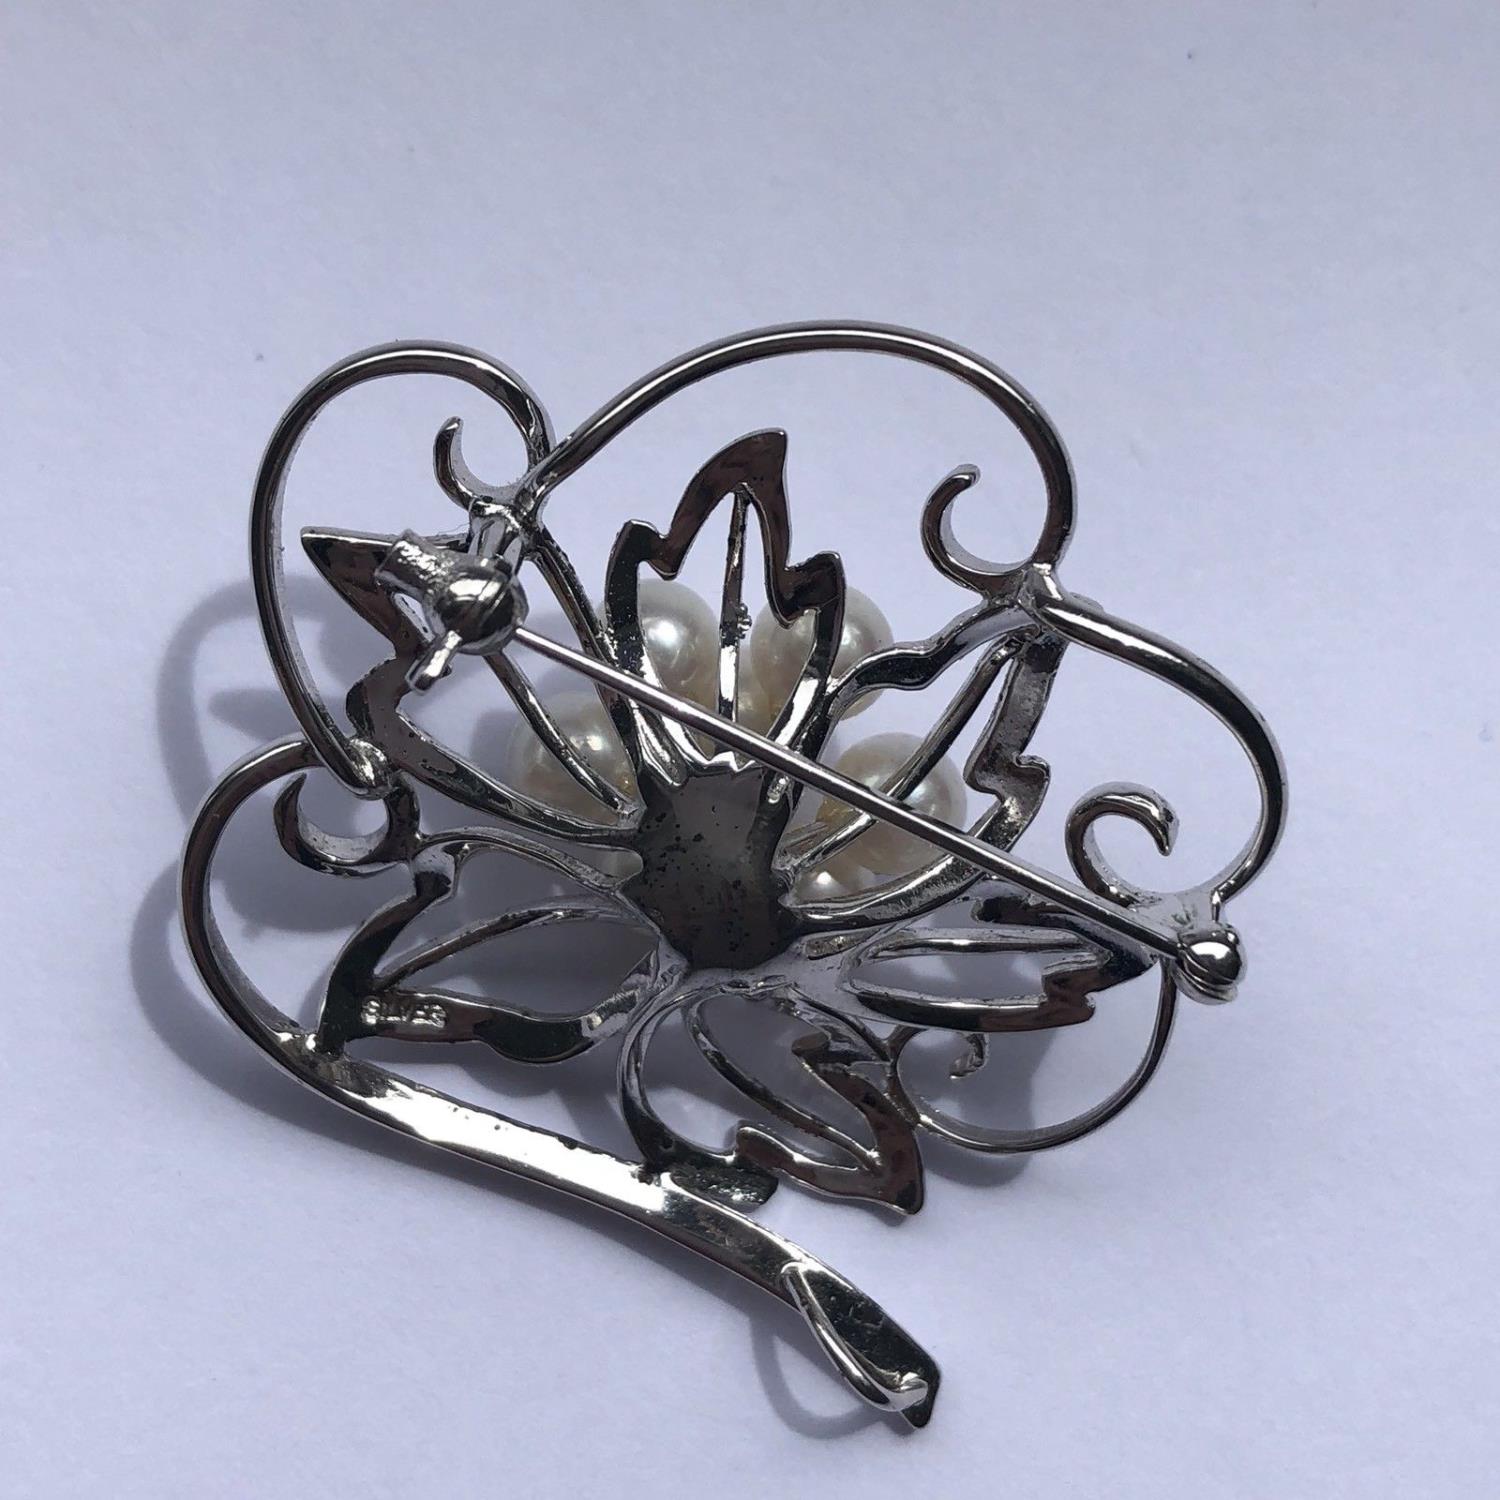 A pretty vintage brooch - solid silver - flower shape with faux pearl cluster - Image 2 of 3